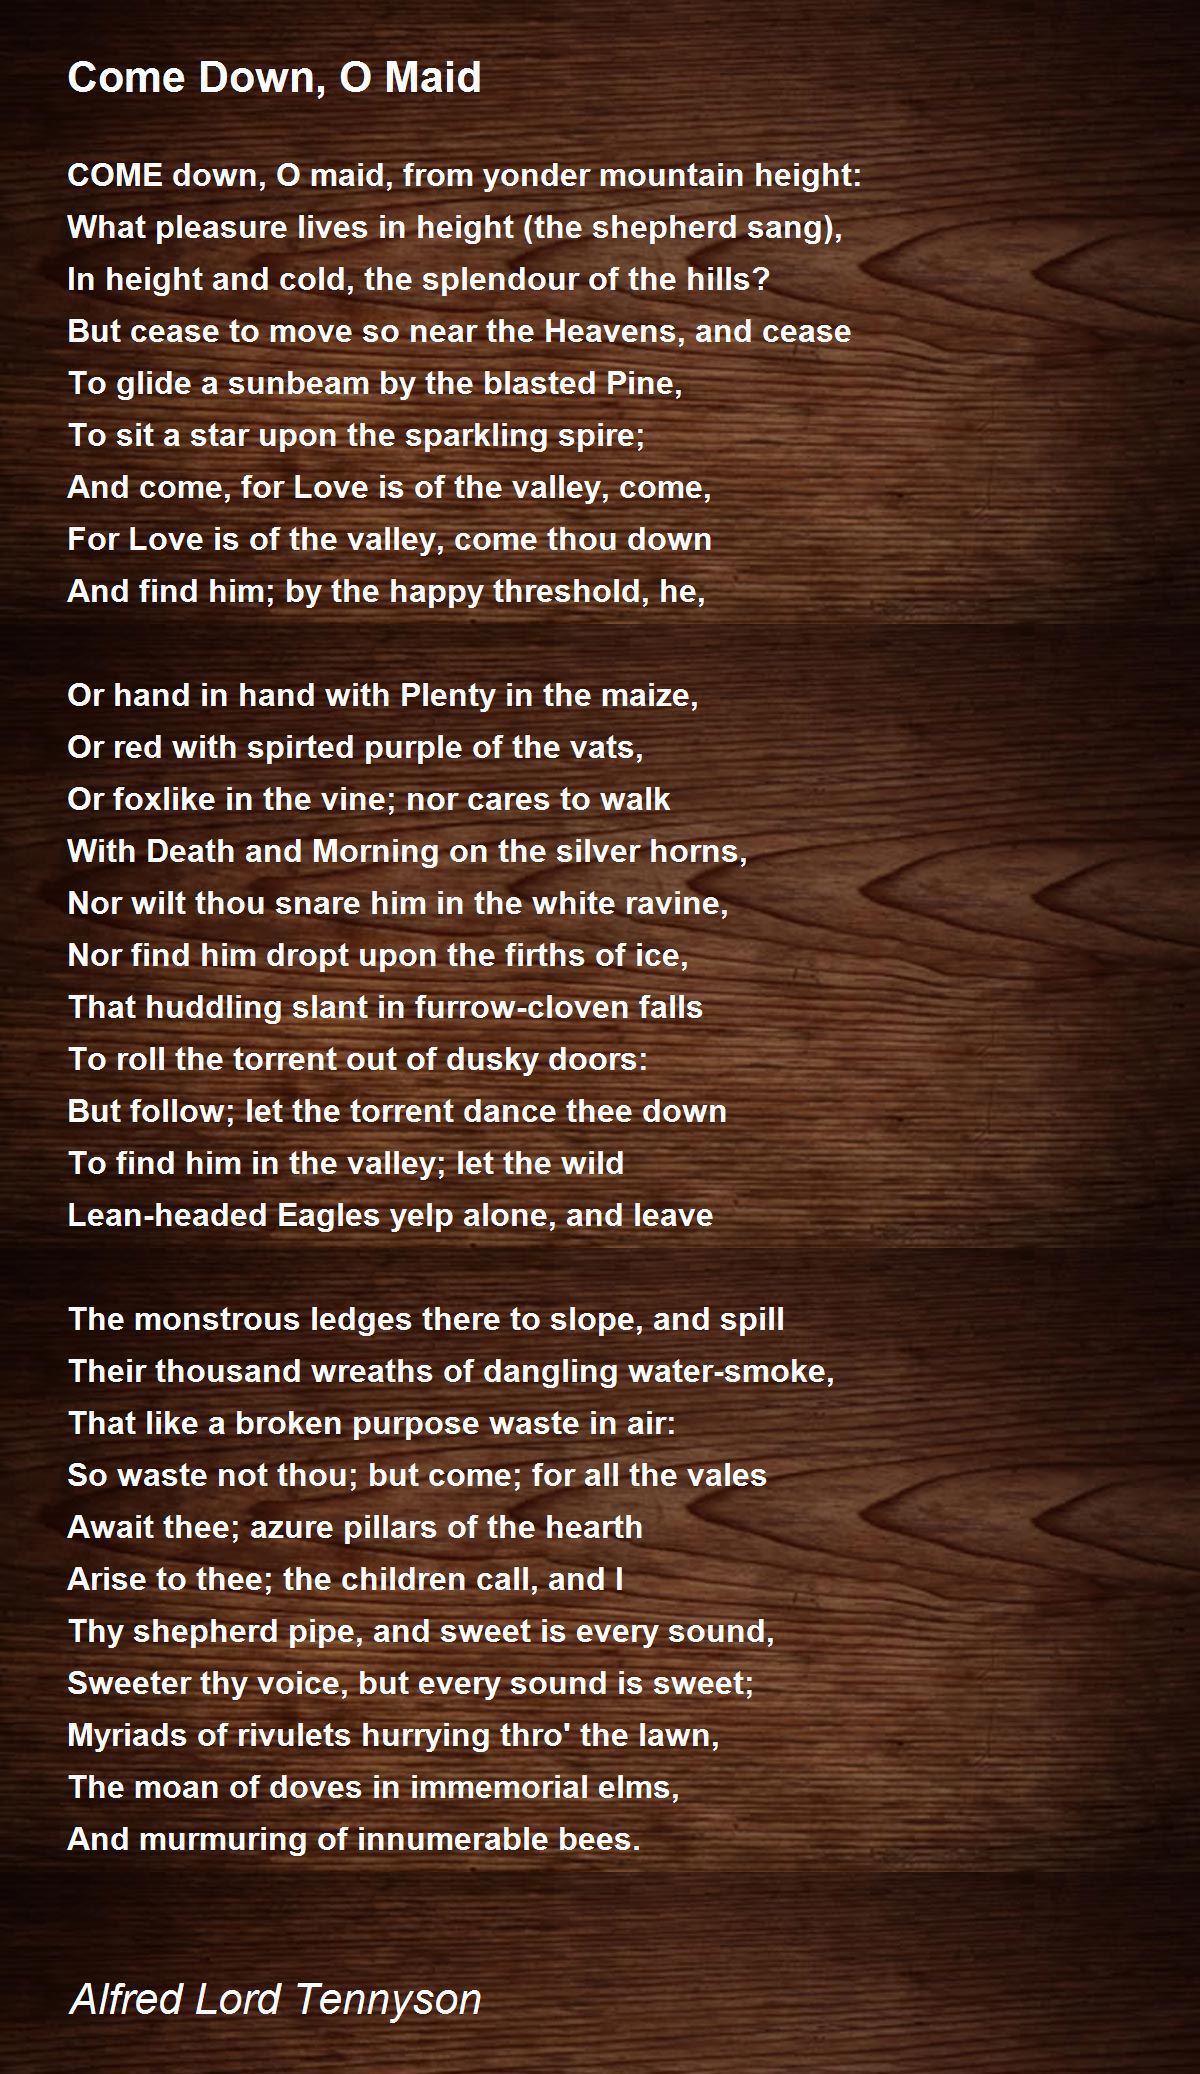 Come Down, O Maid Poem by Alfred Lord Tennyson - Poem Hunter